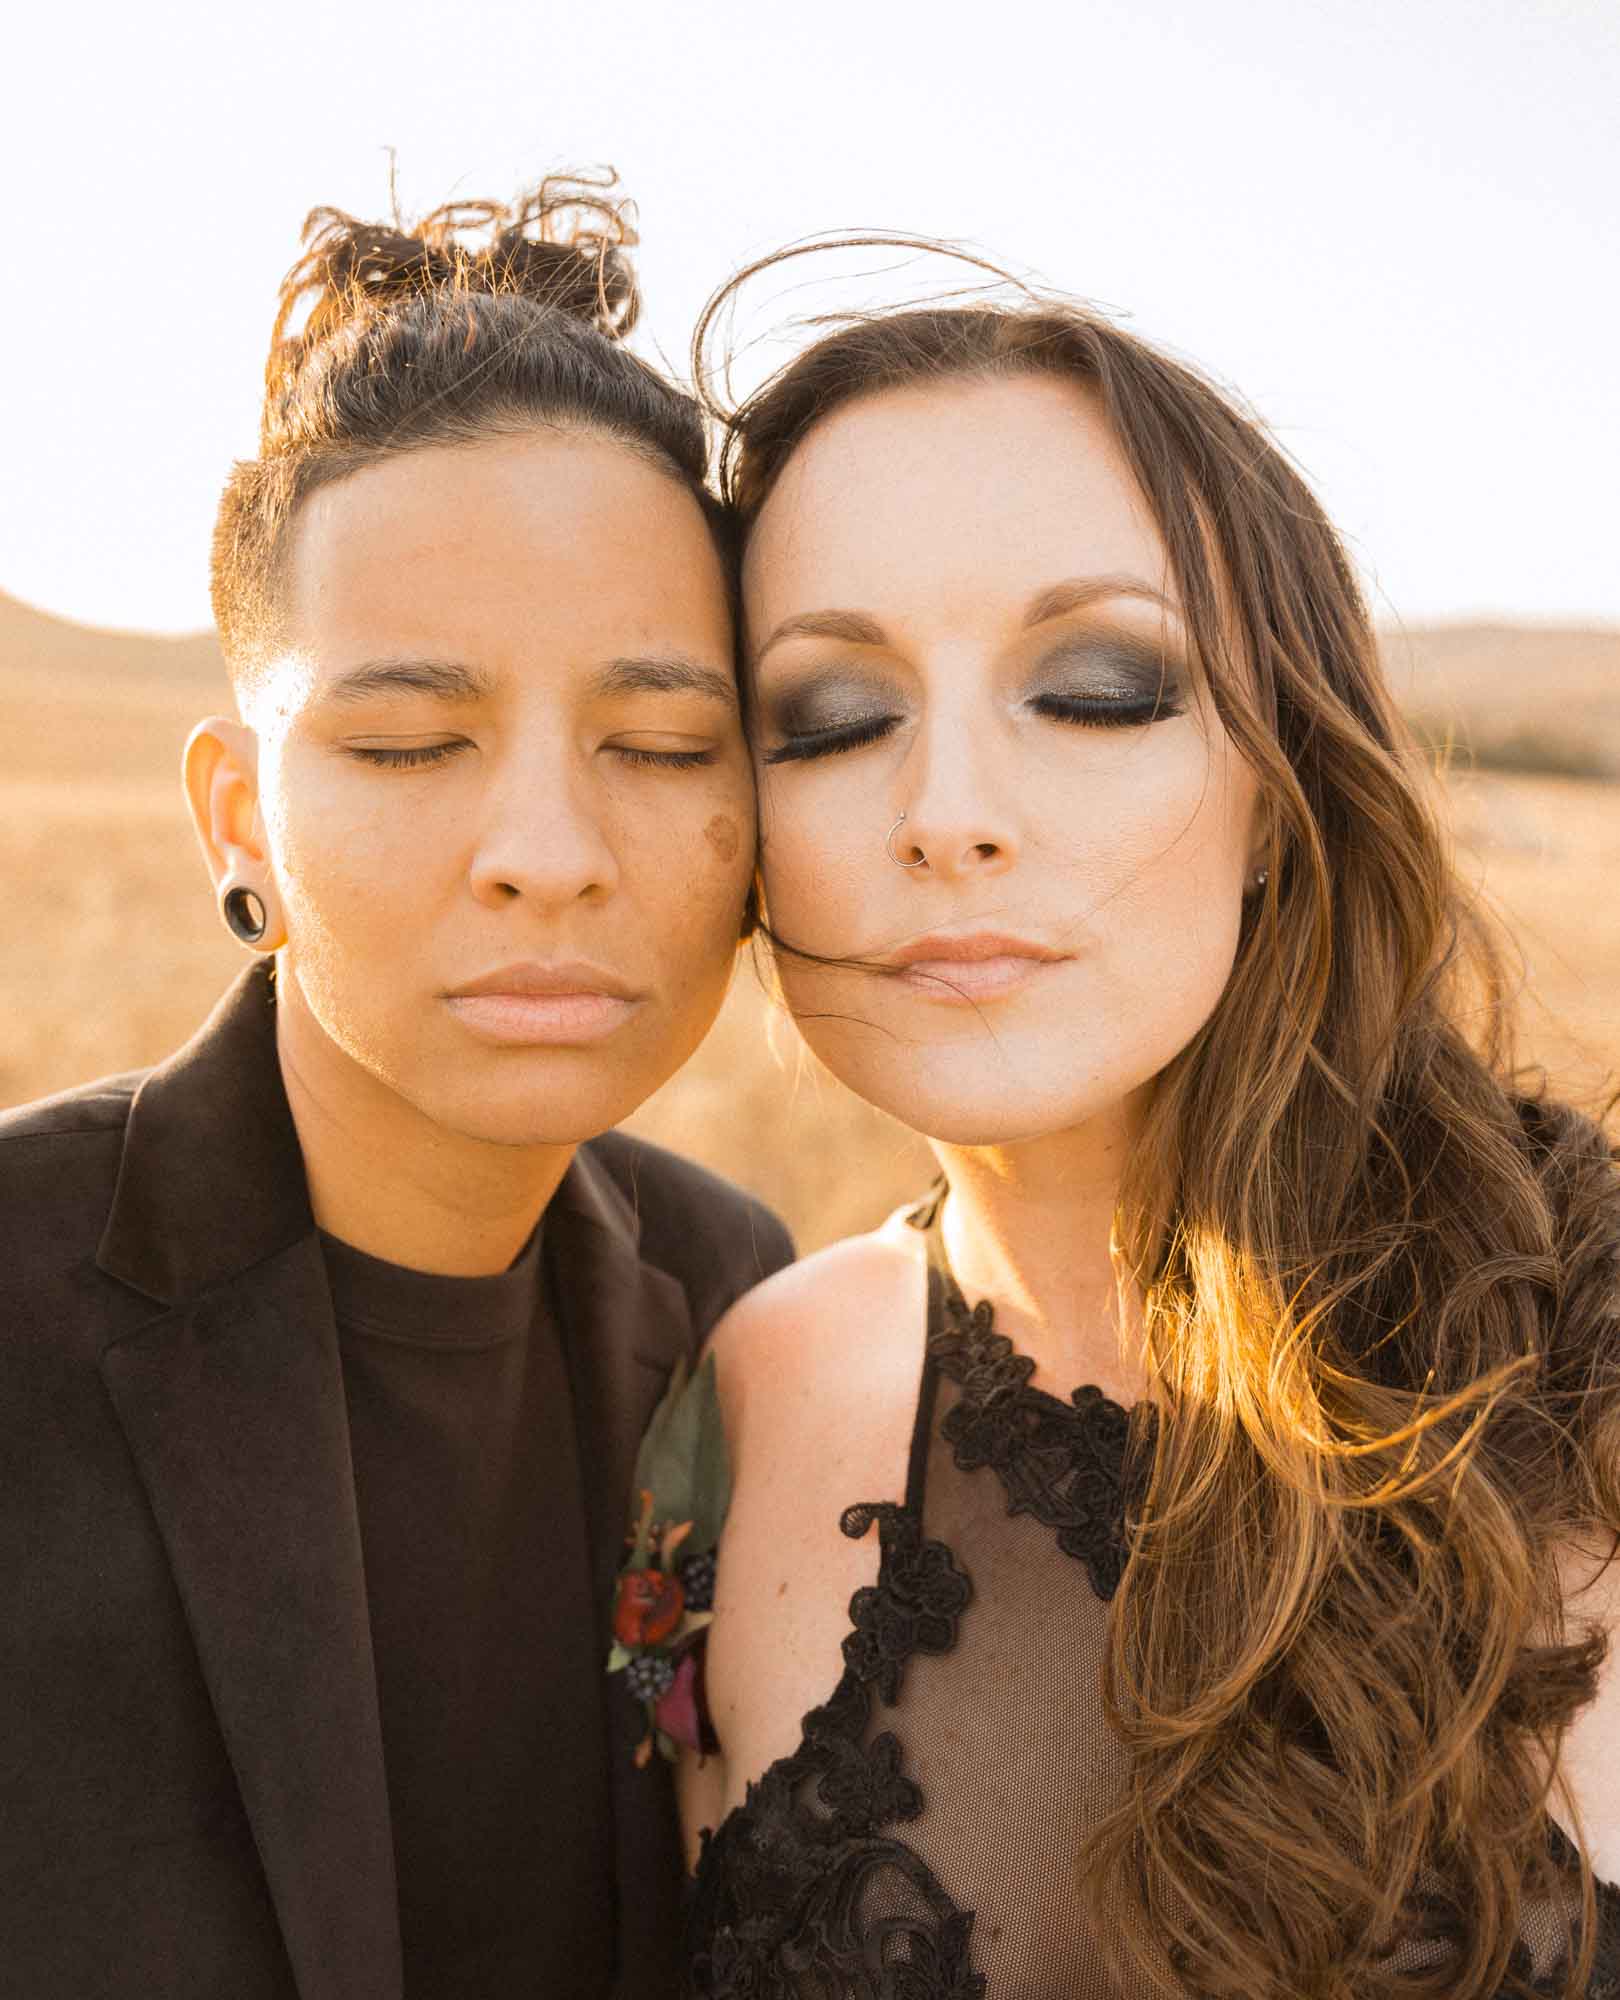 Oklahoma elopement in the Wichita Mountains with enchanting all black attire | Brooke Lewis Photography | Featured on Equally Wed, the leading LGBTQ+ wedding magazine - - forest, mountains, black attire, pride flag